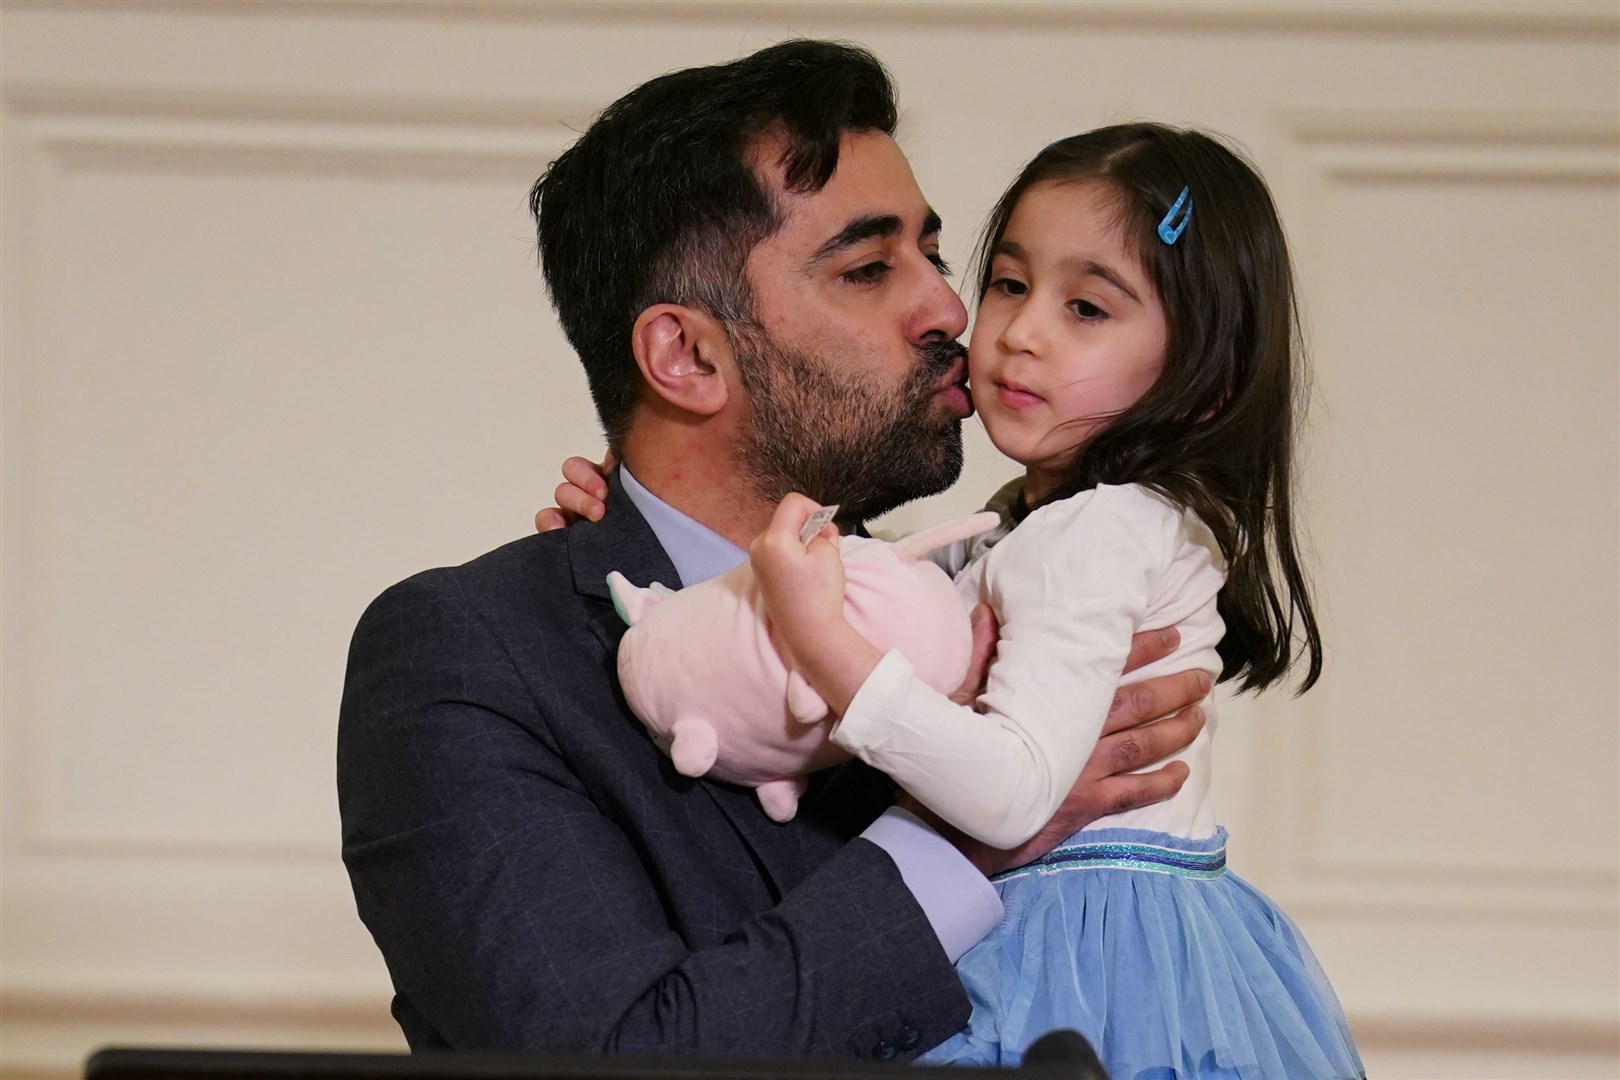 Health Secretary Humza Yousaf, with his daughter Amal, at the launch of his campaign (Andrew Milligan/PA)